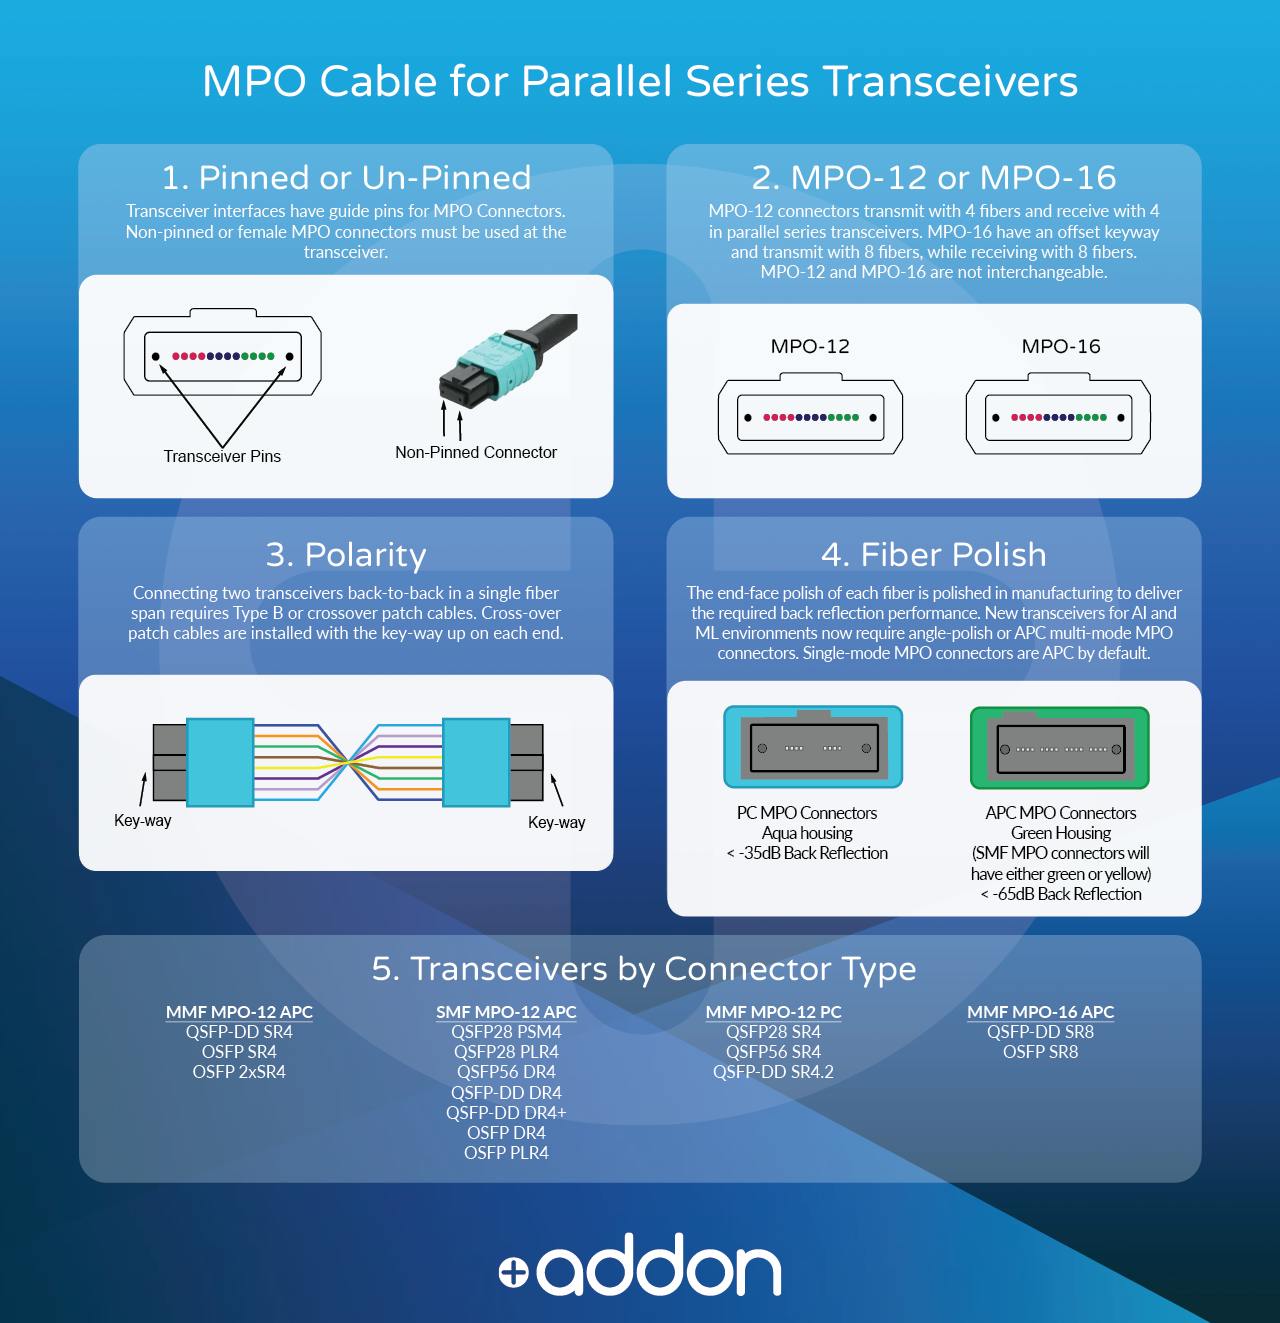 MPO Cable for Parallel Series Transceivers